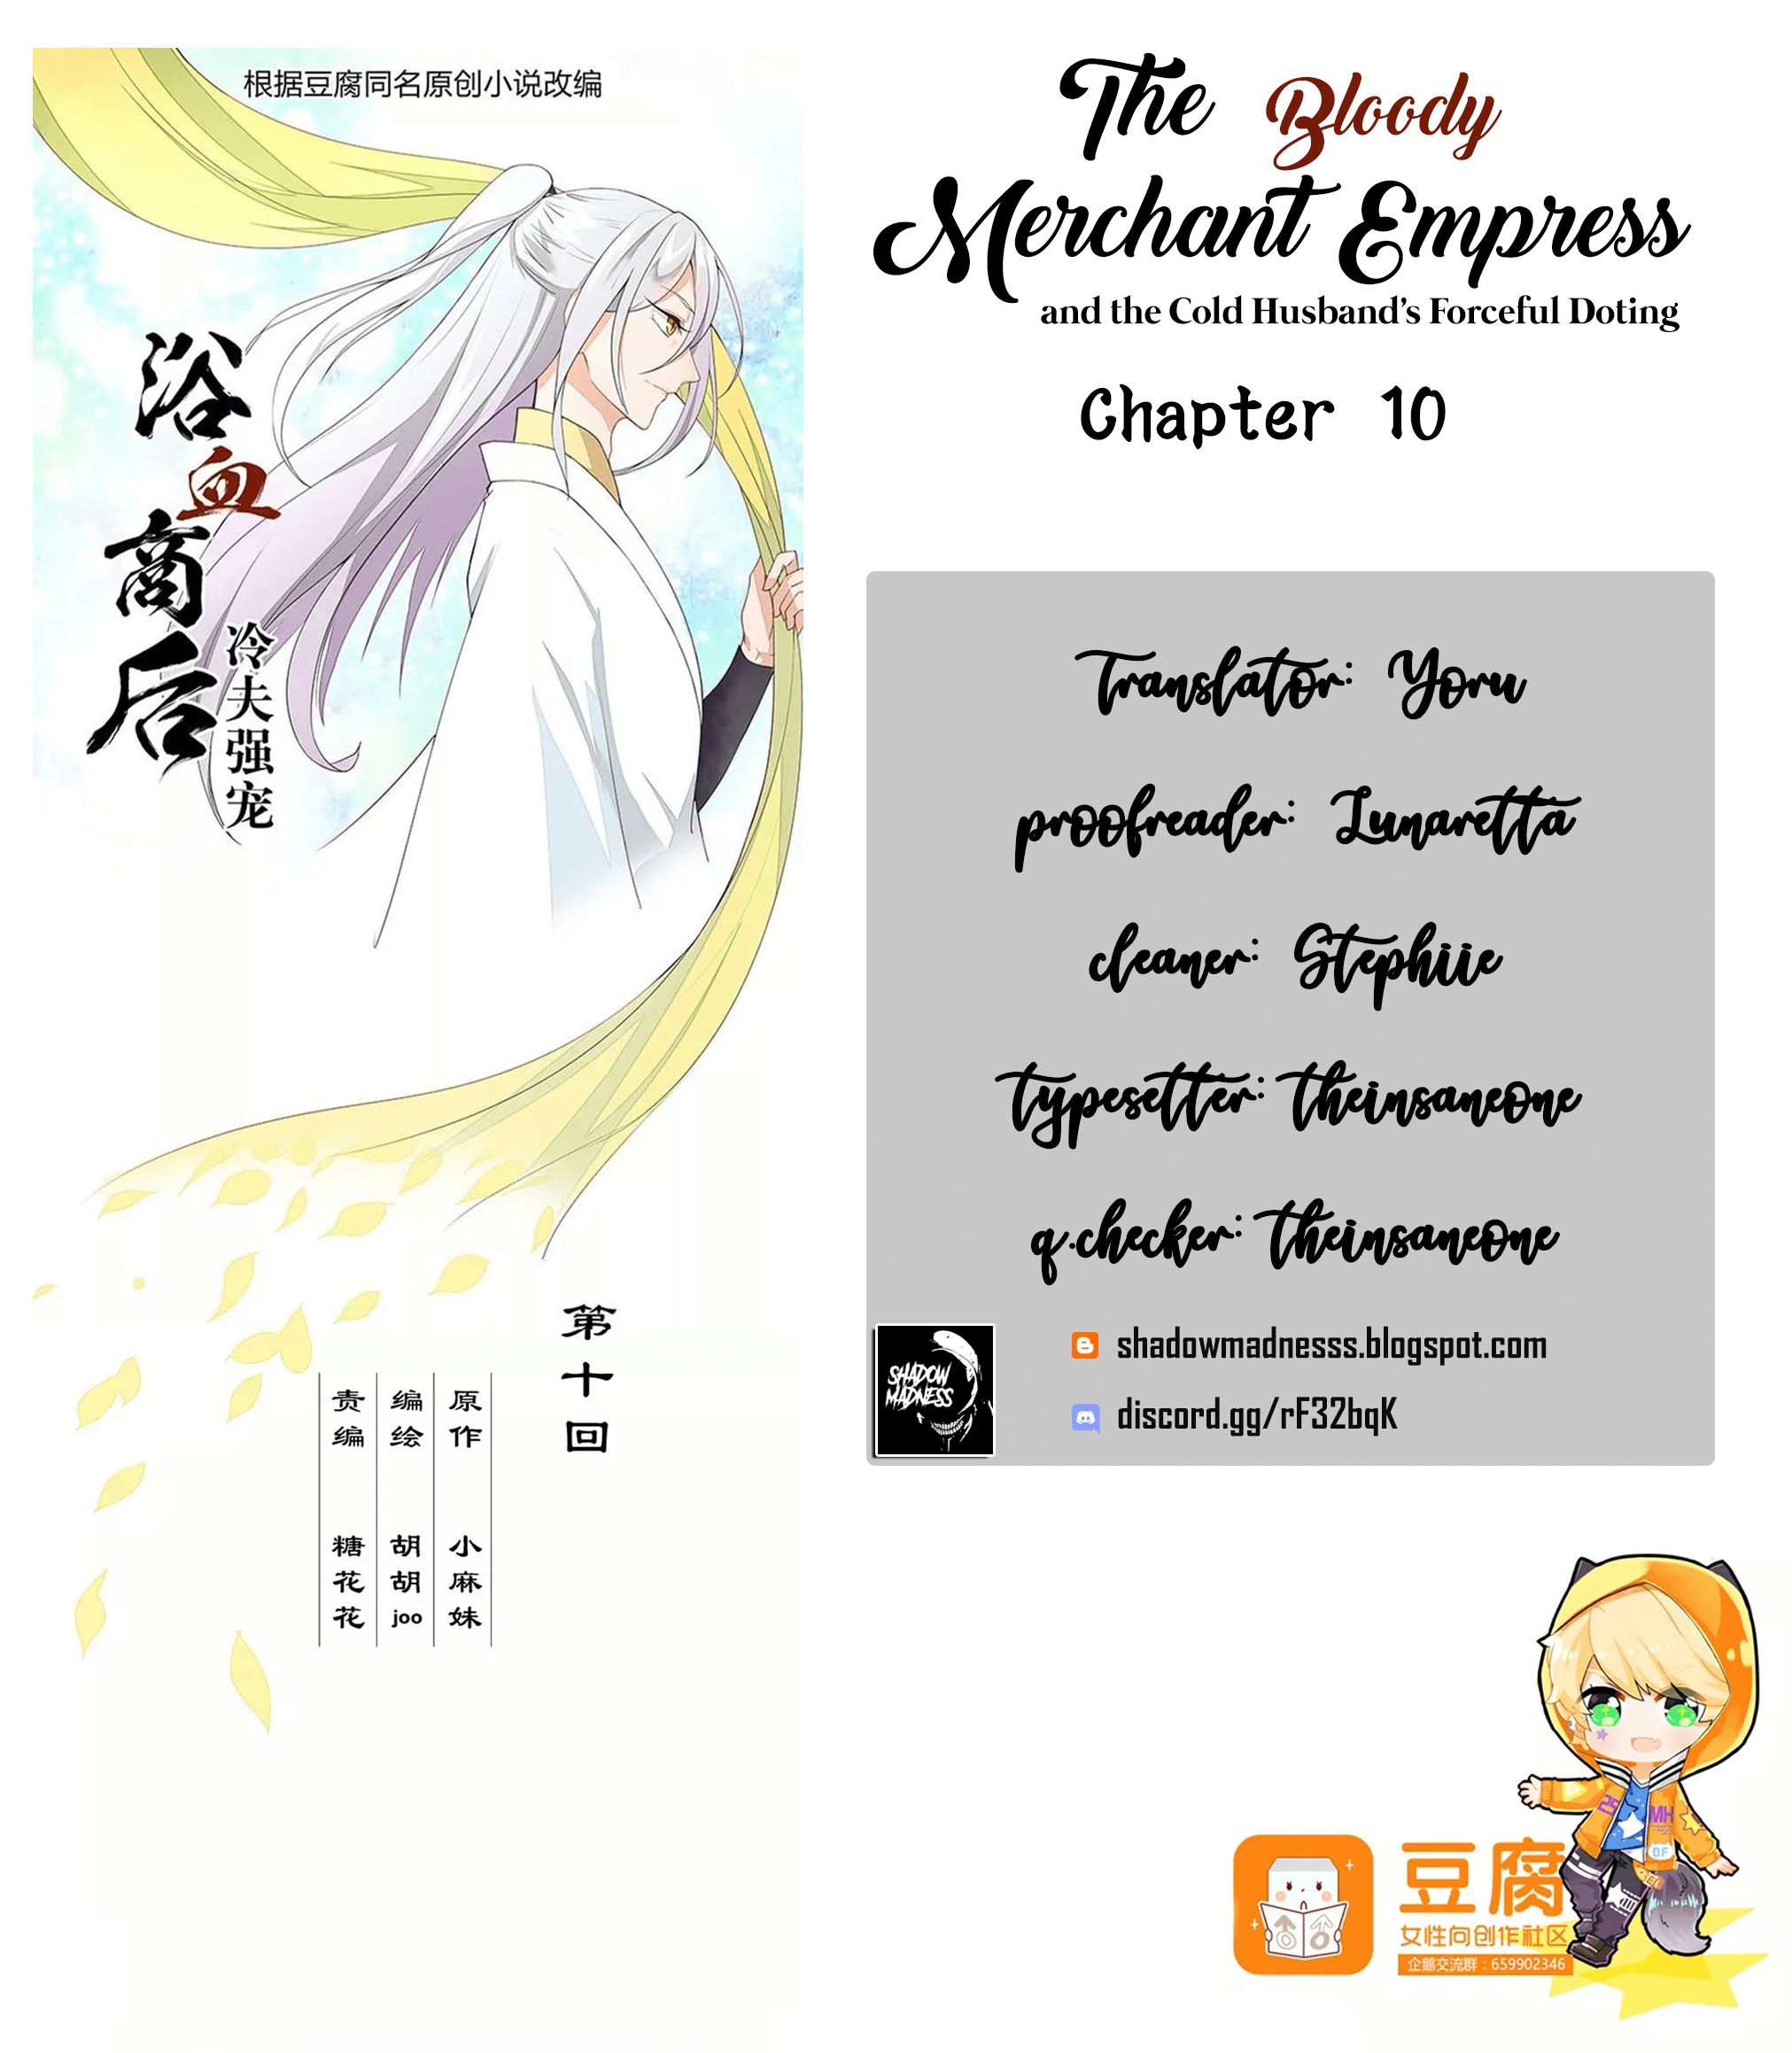 The Bloody Merchant Empress and the Cold Husband's Forceful Doting Chapter 10